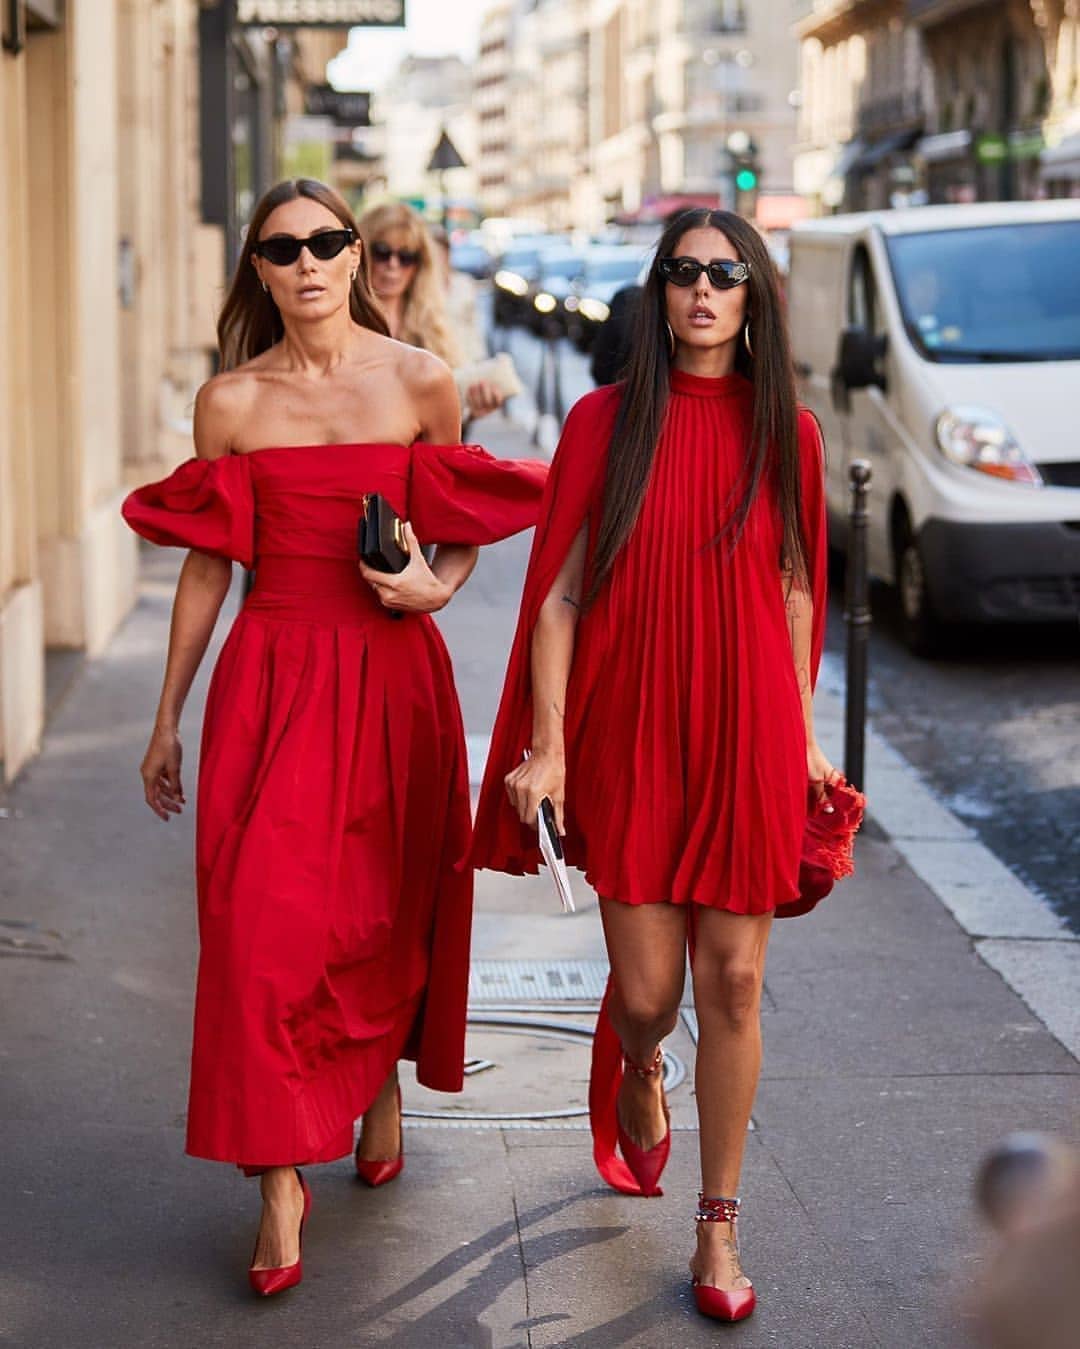 Melody Jacob: How in - 27 hottest red summer outfits for women